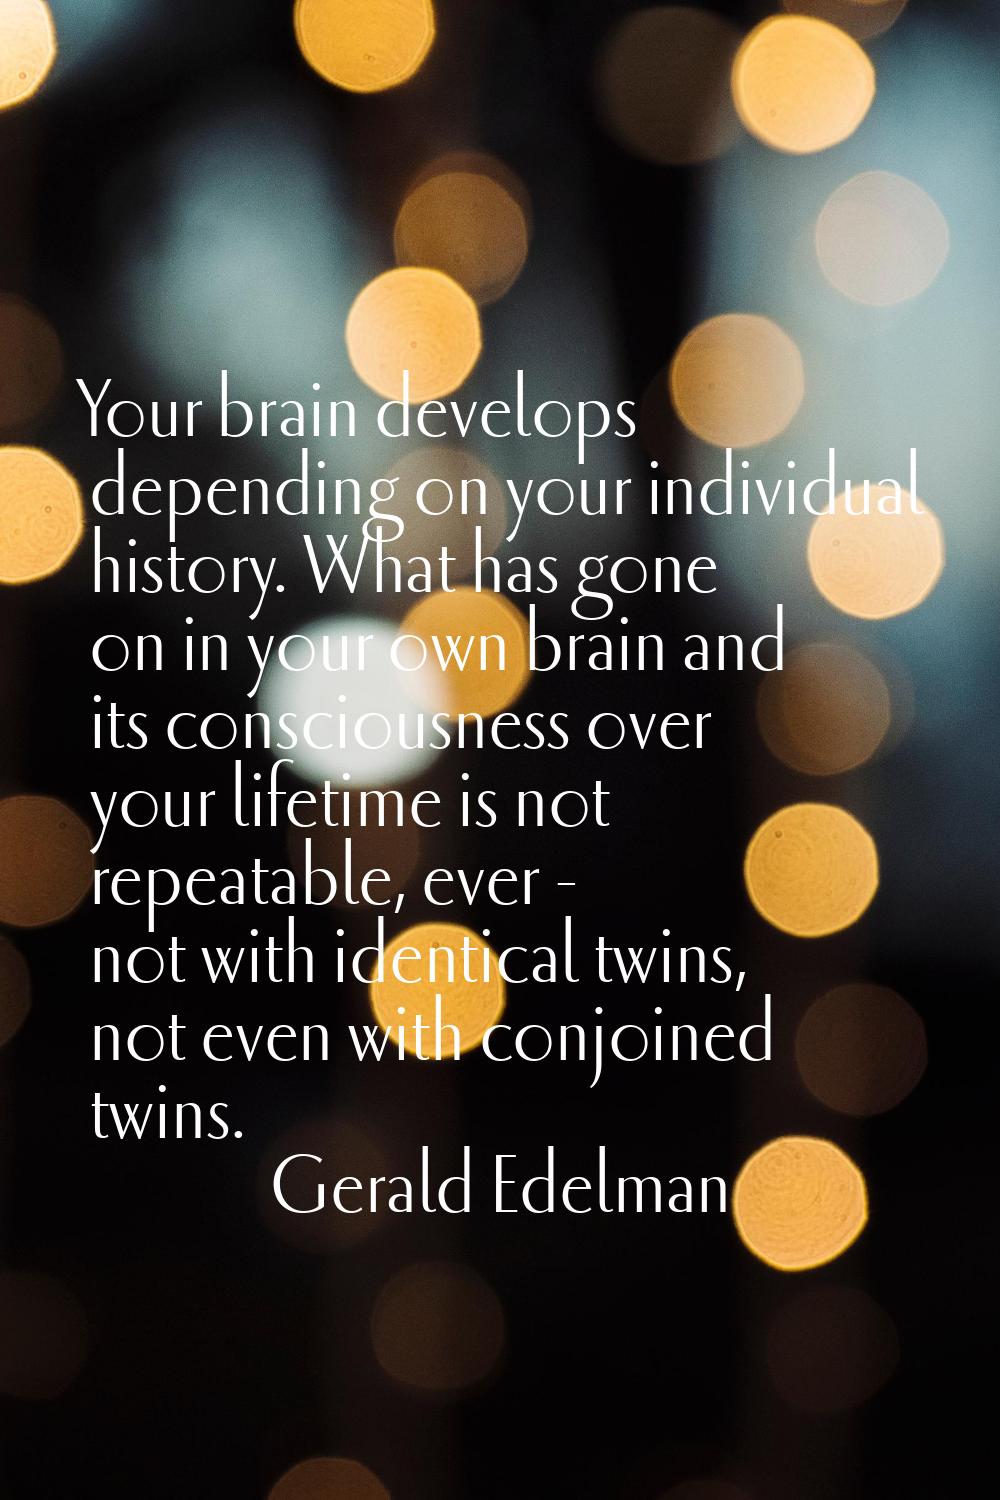 Your brain develops depending on your individual history. What has gone on in your own brain and it